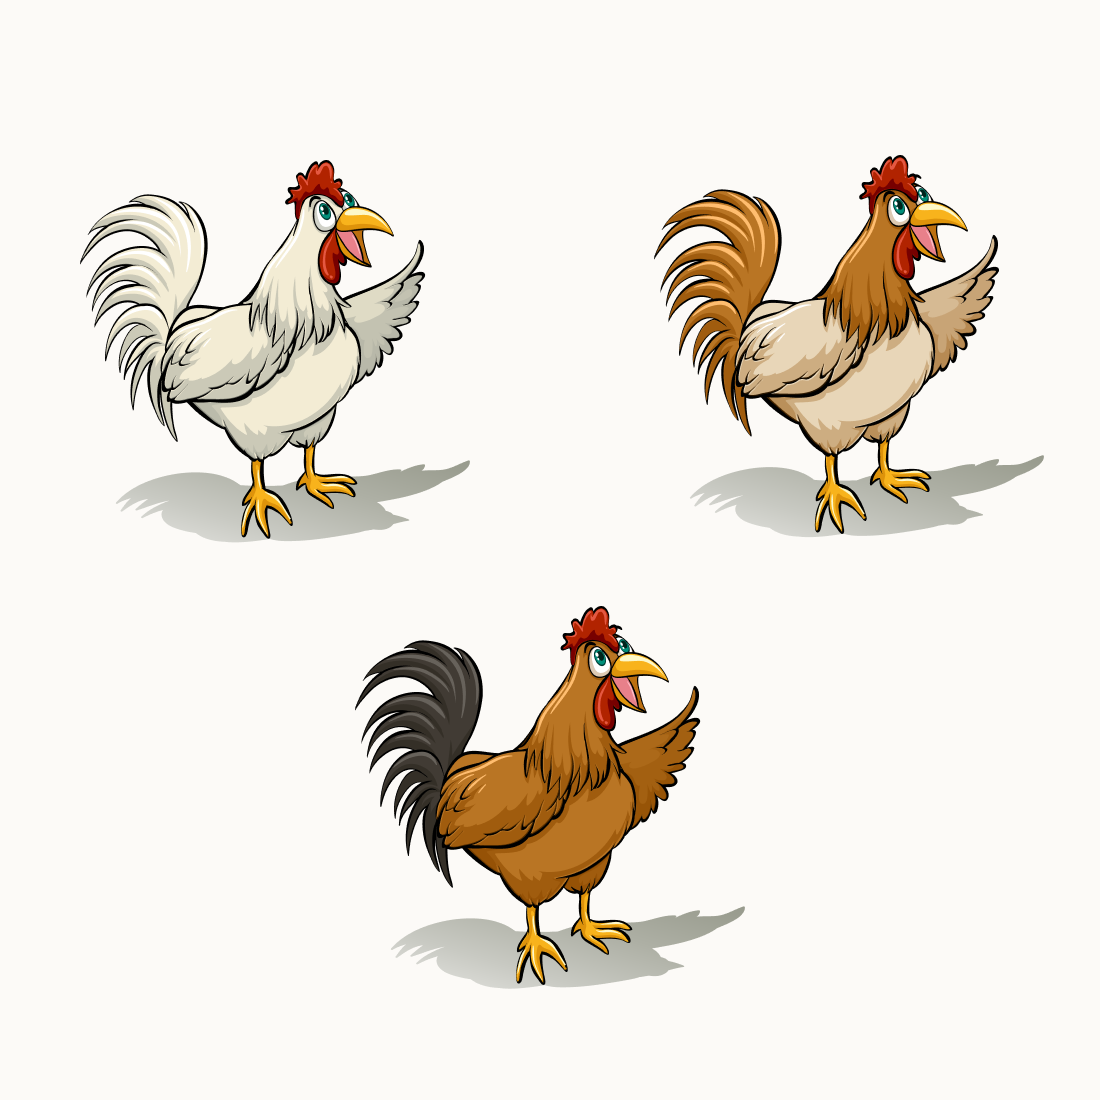 Group of three chickens standing next to each other.